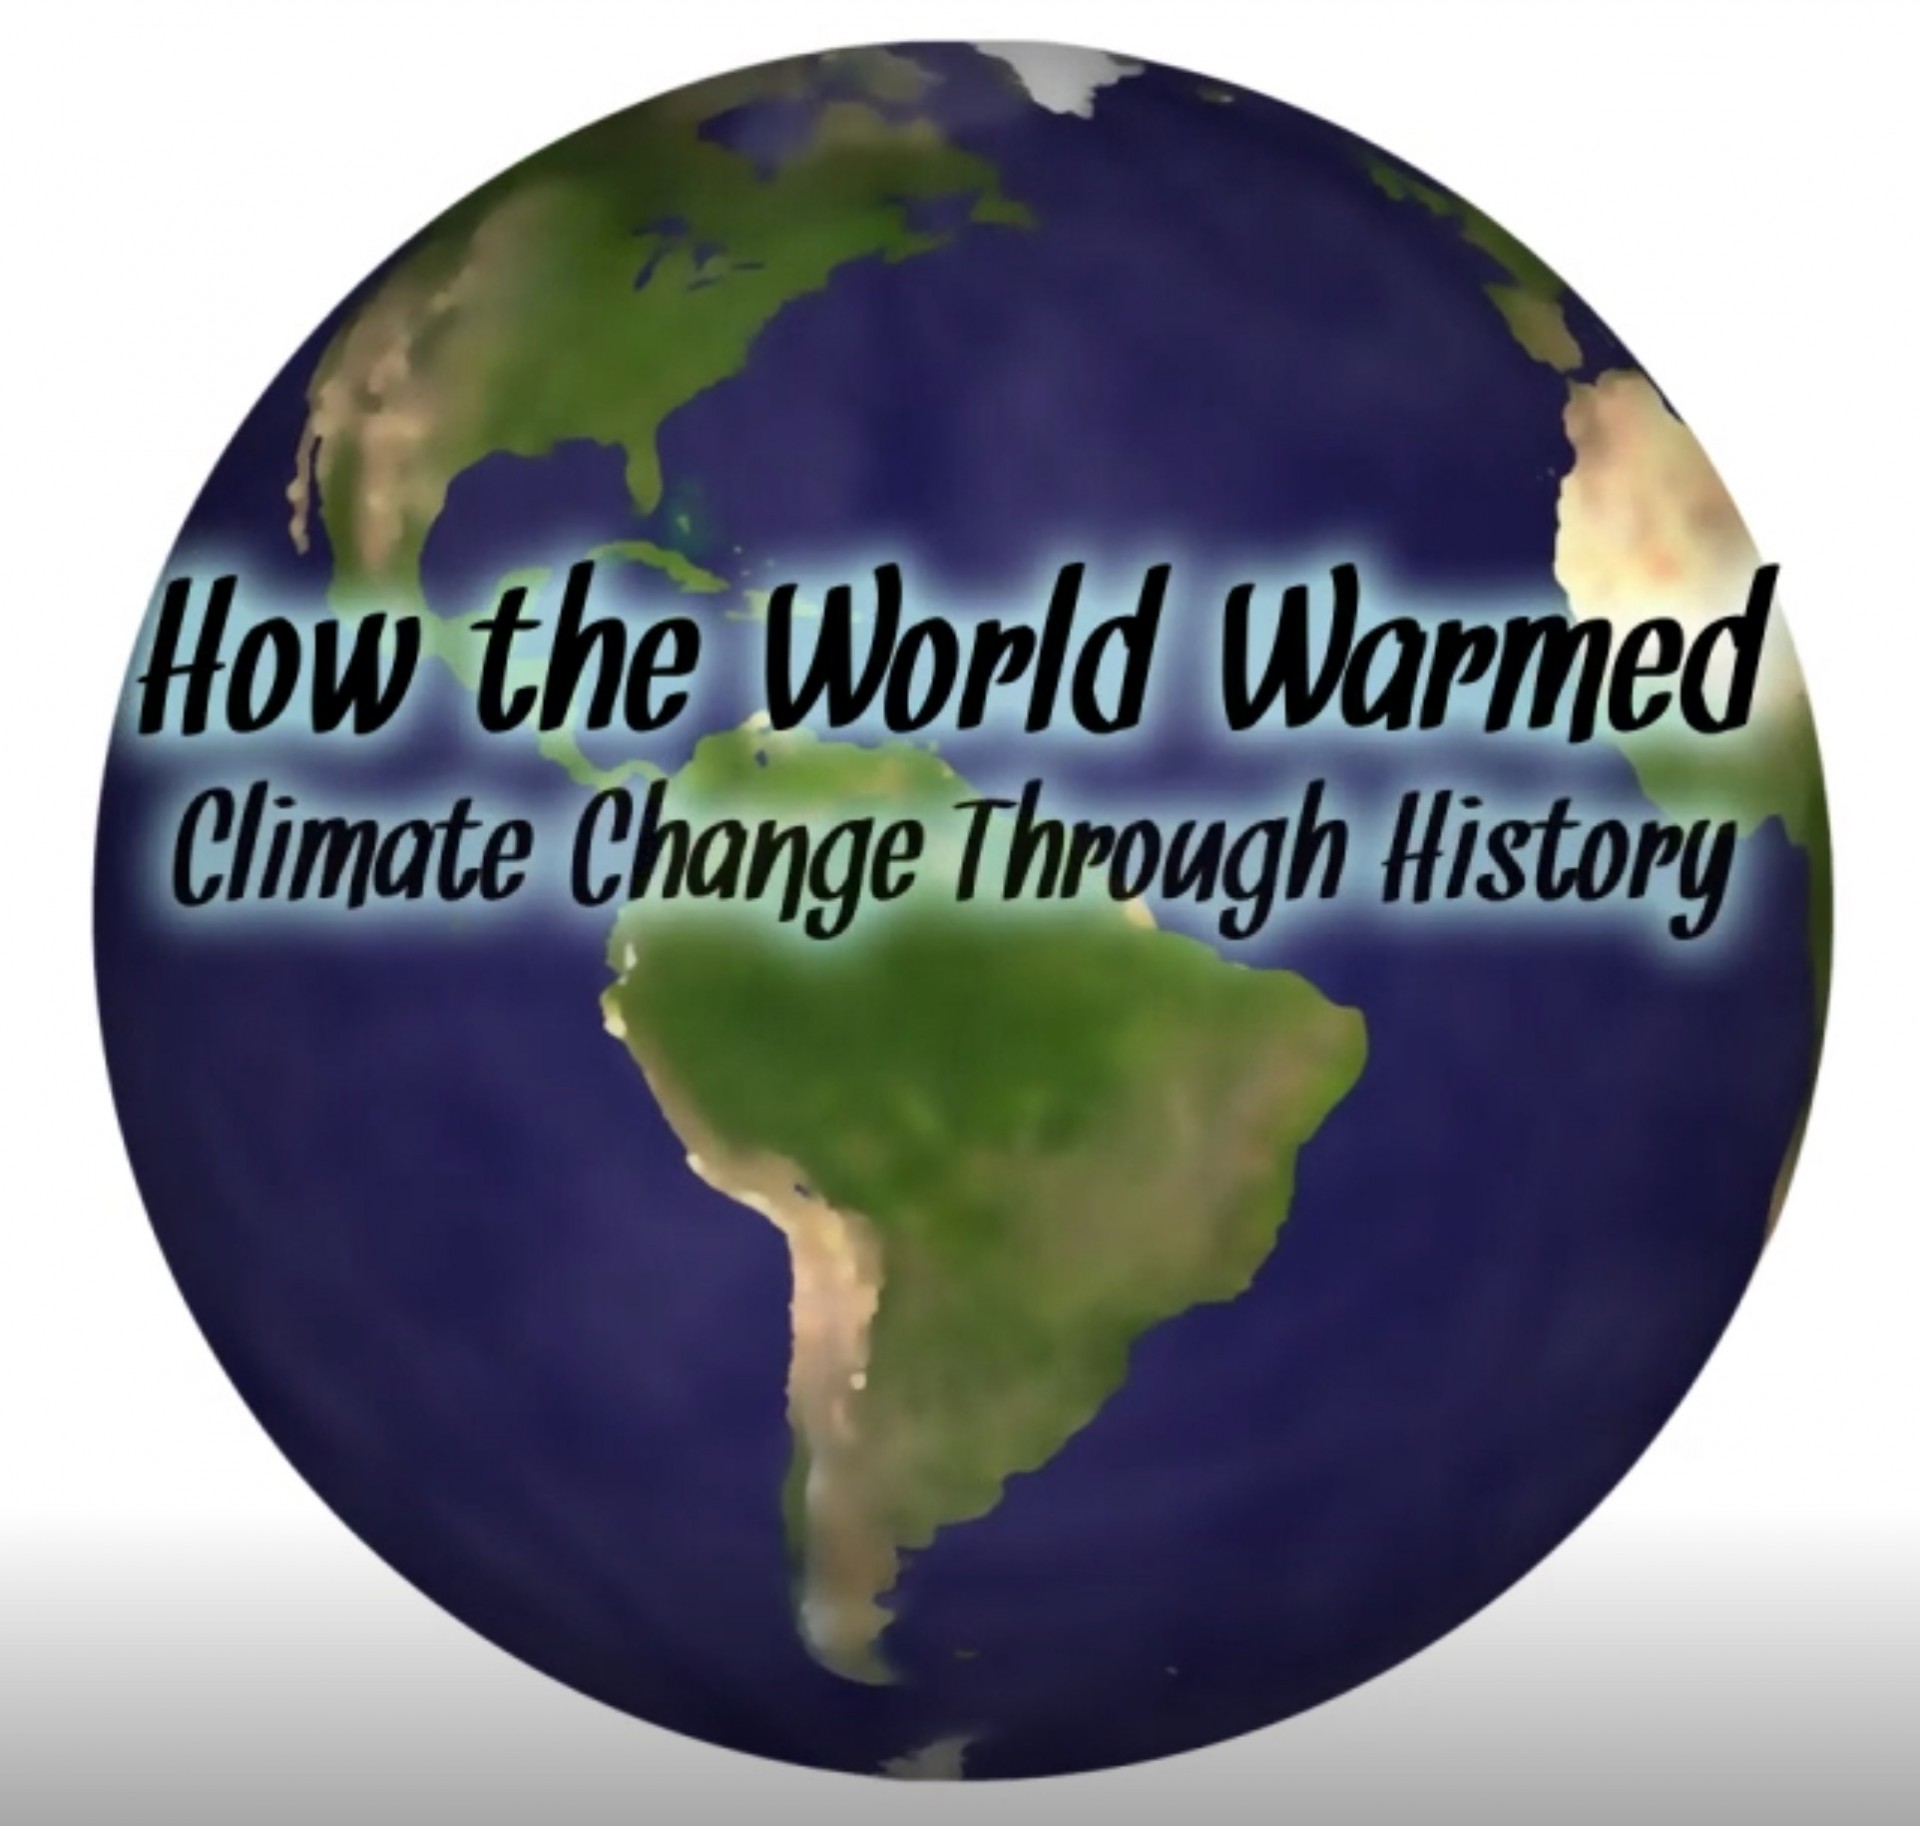 How the World Warmed: Climate Change Through History